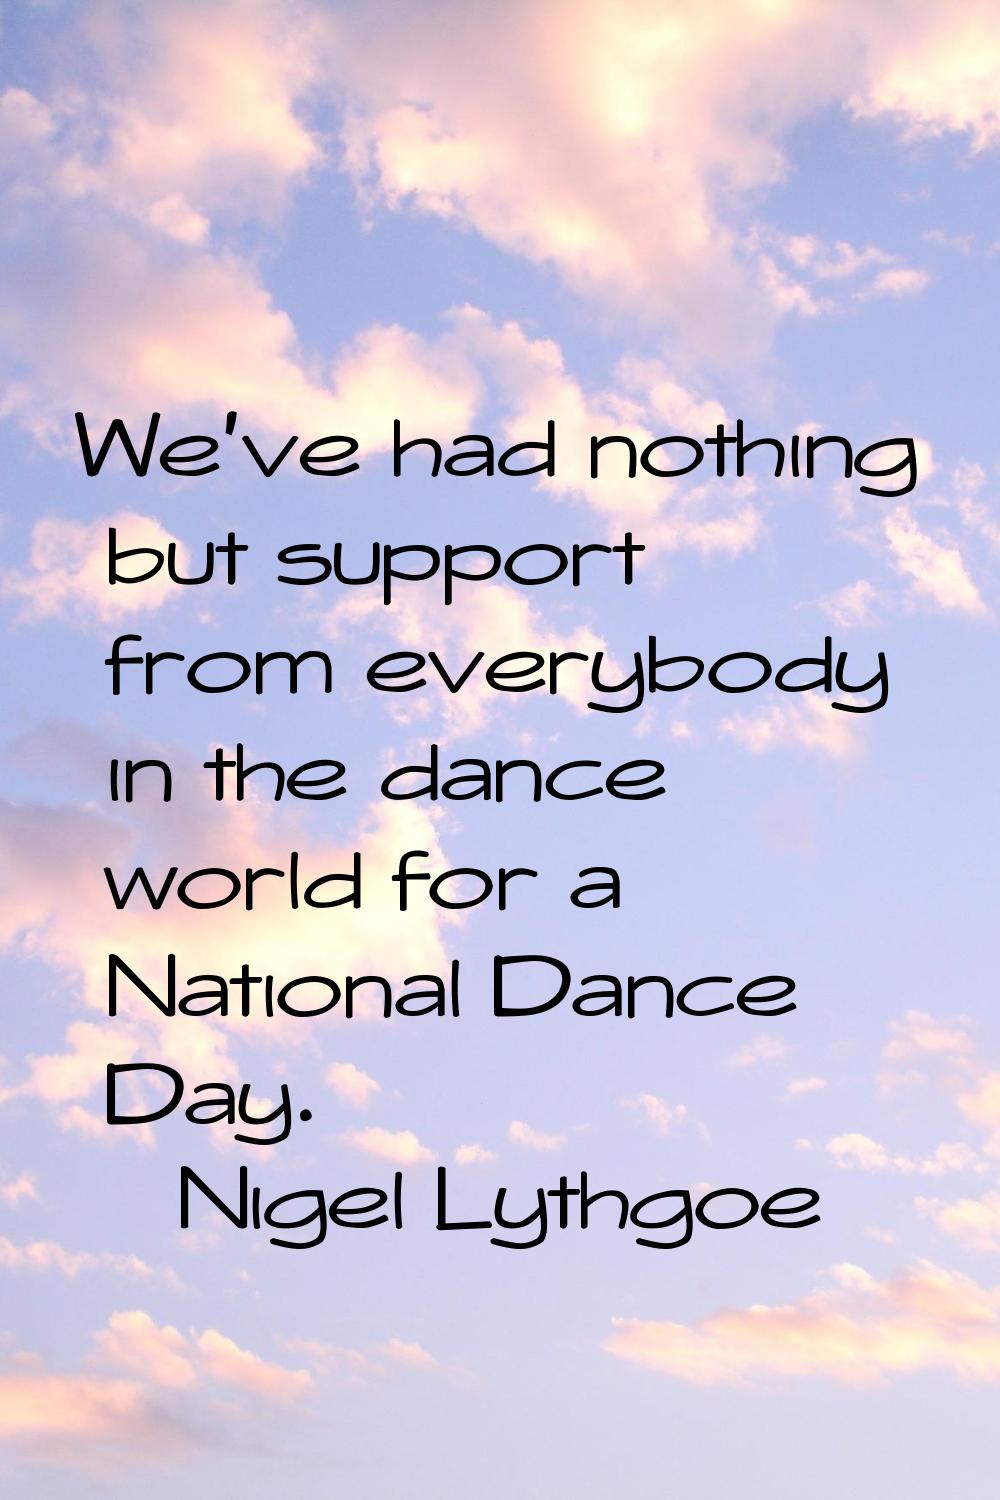 We've had nothing but support from everybody in the dance world for a National Dance Day.